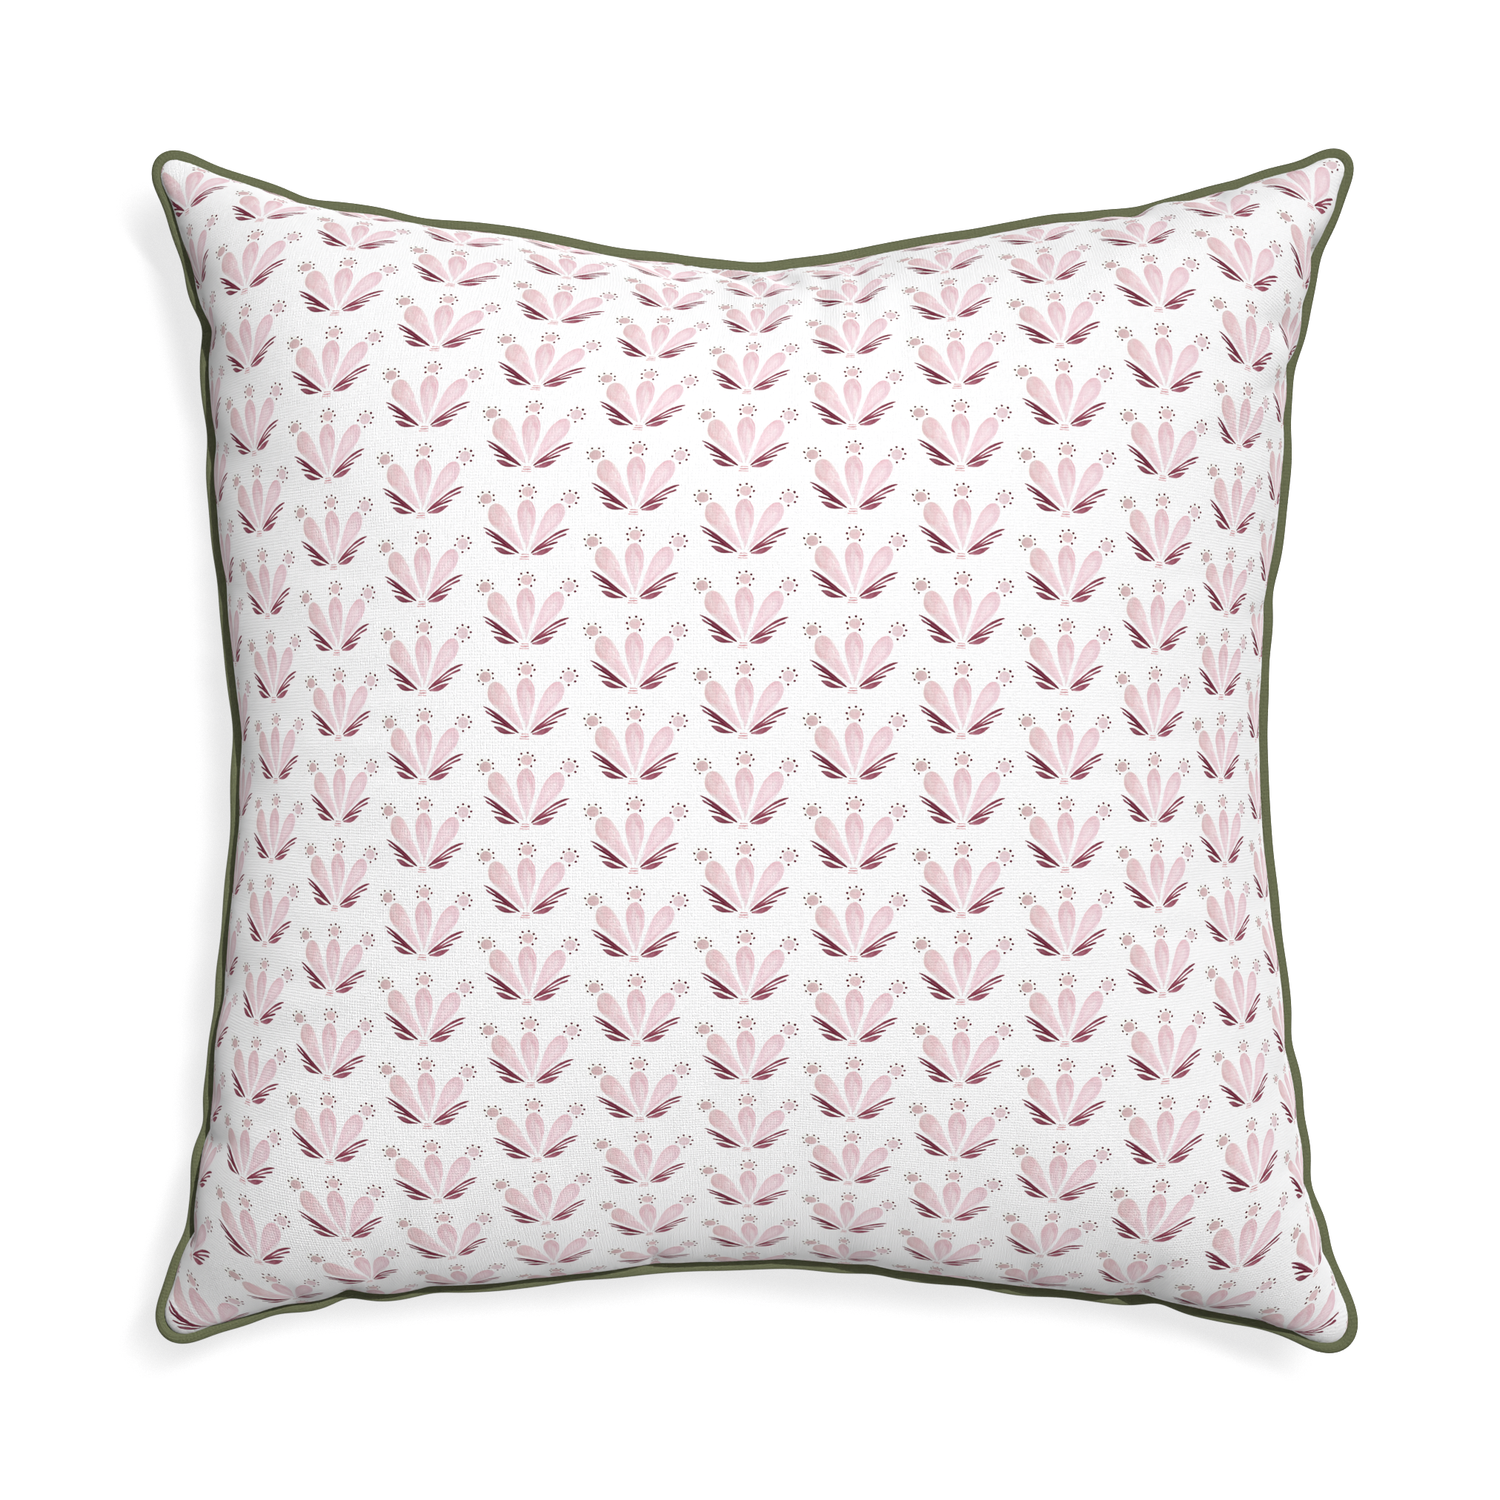 Euro-sham serena pink custom pillow with f piping on white background